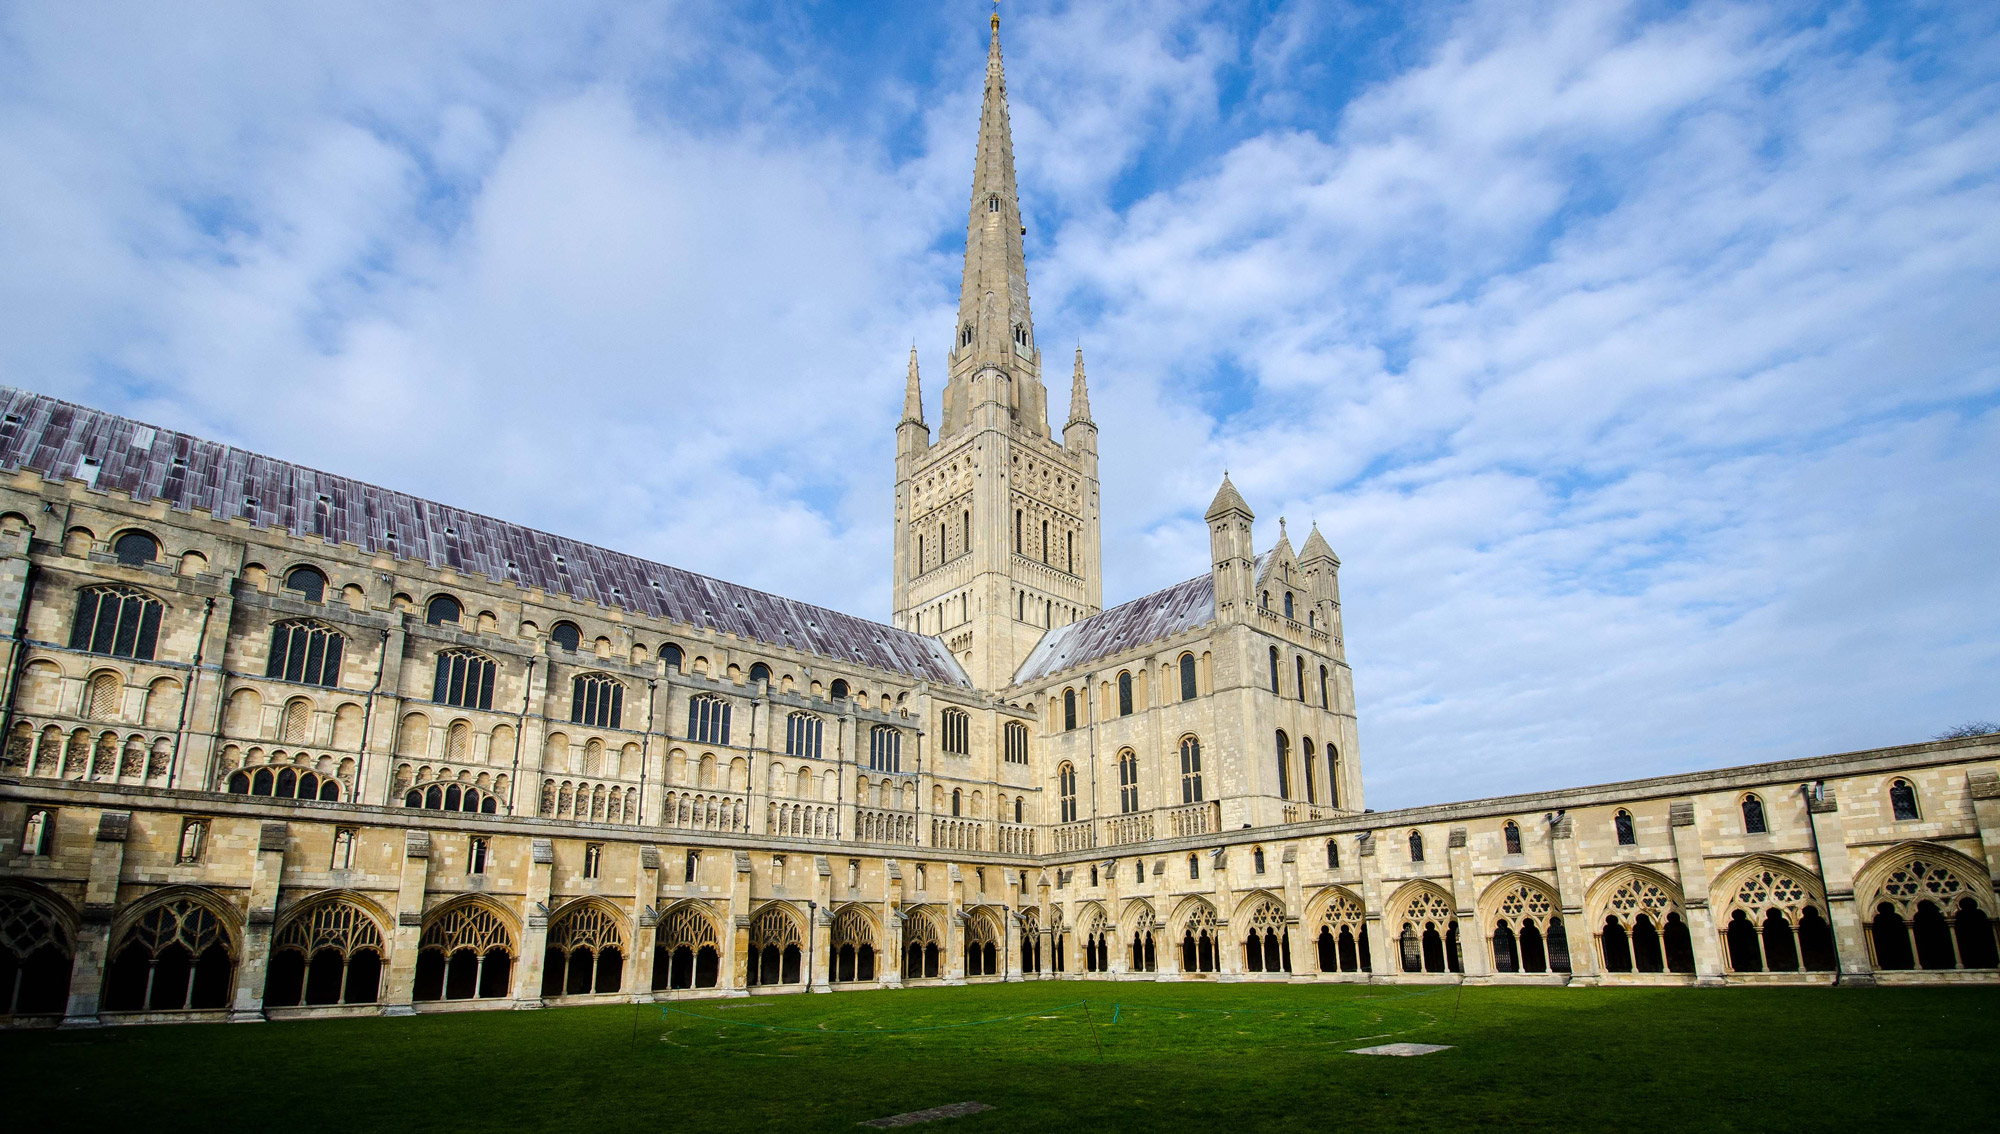 View of the impressive Norwich Cathedral